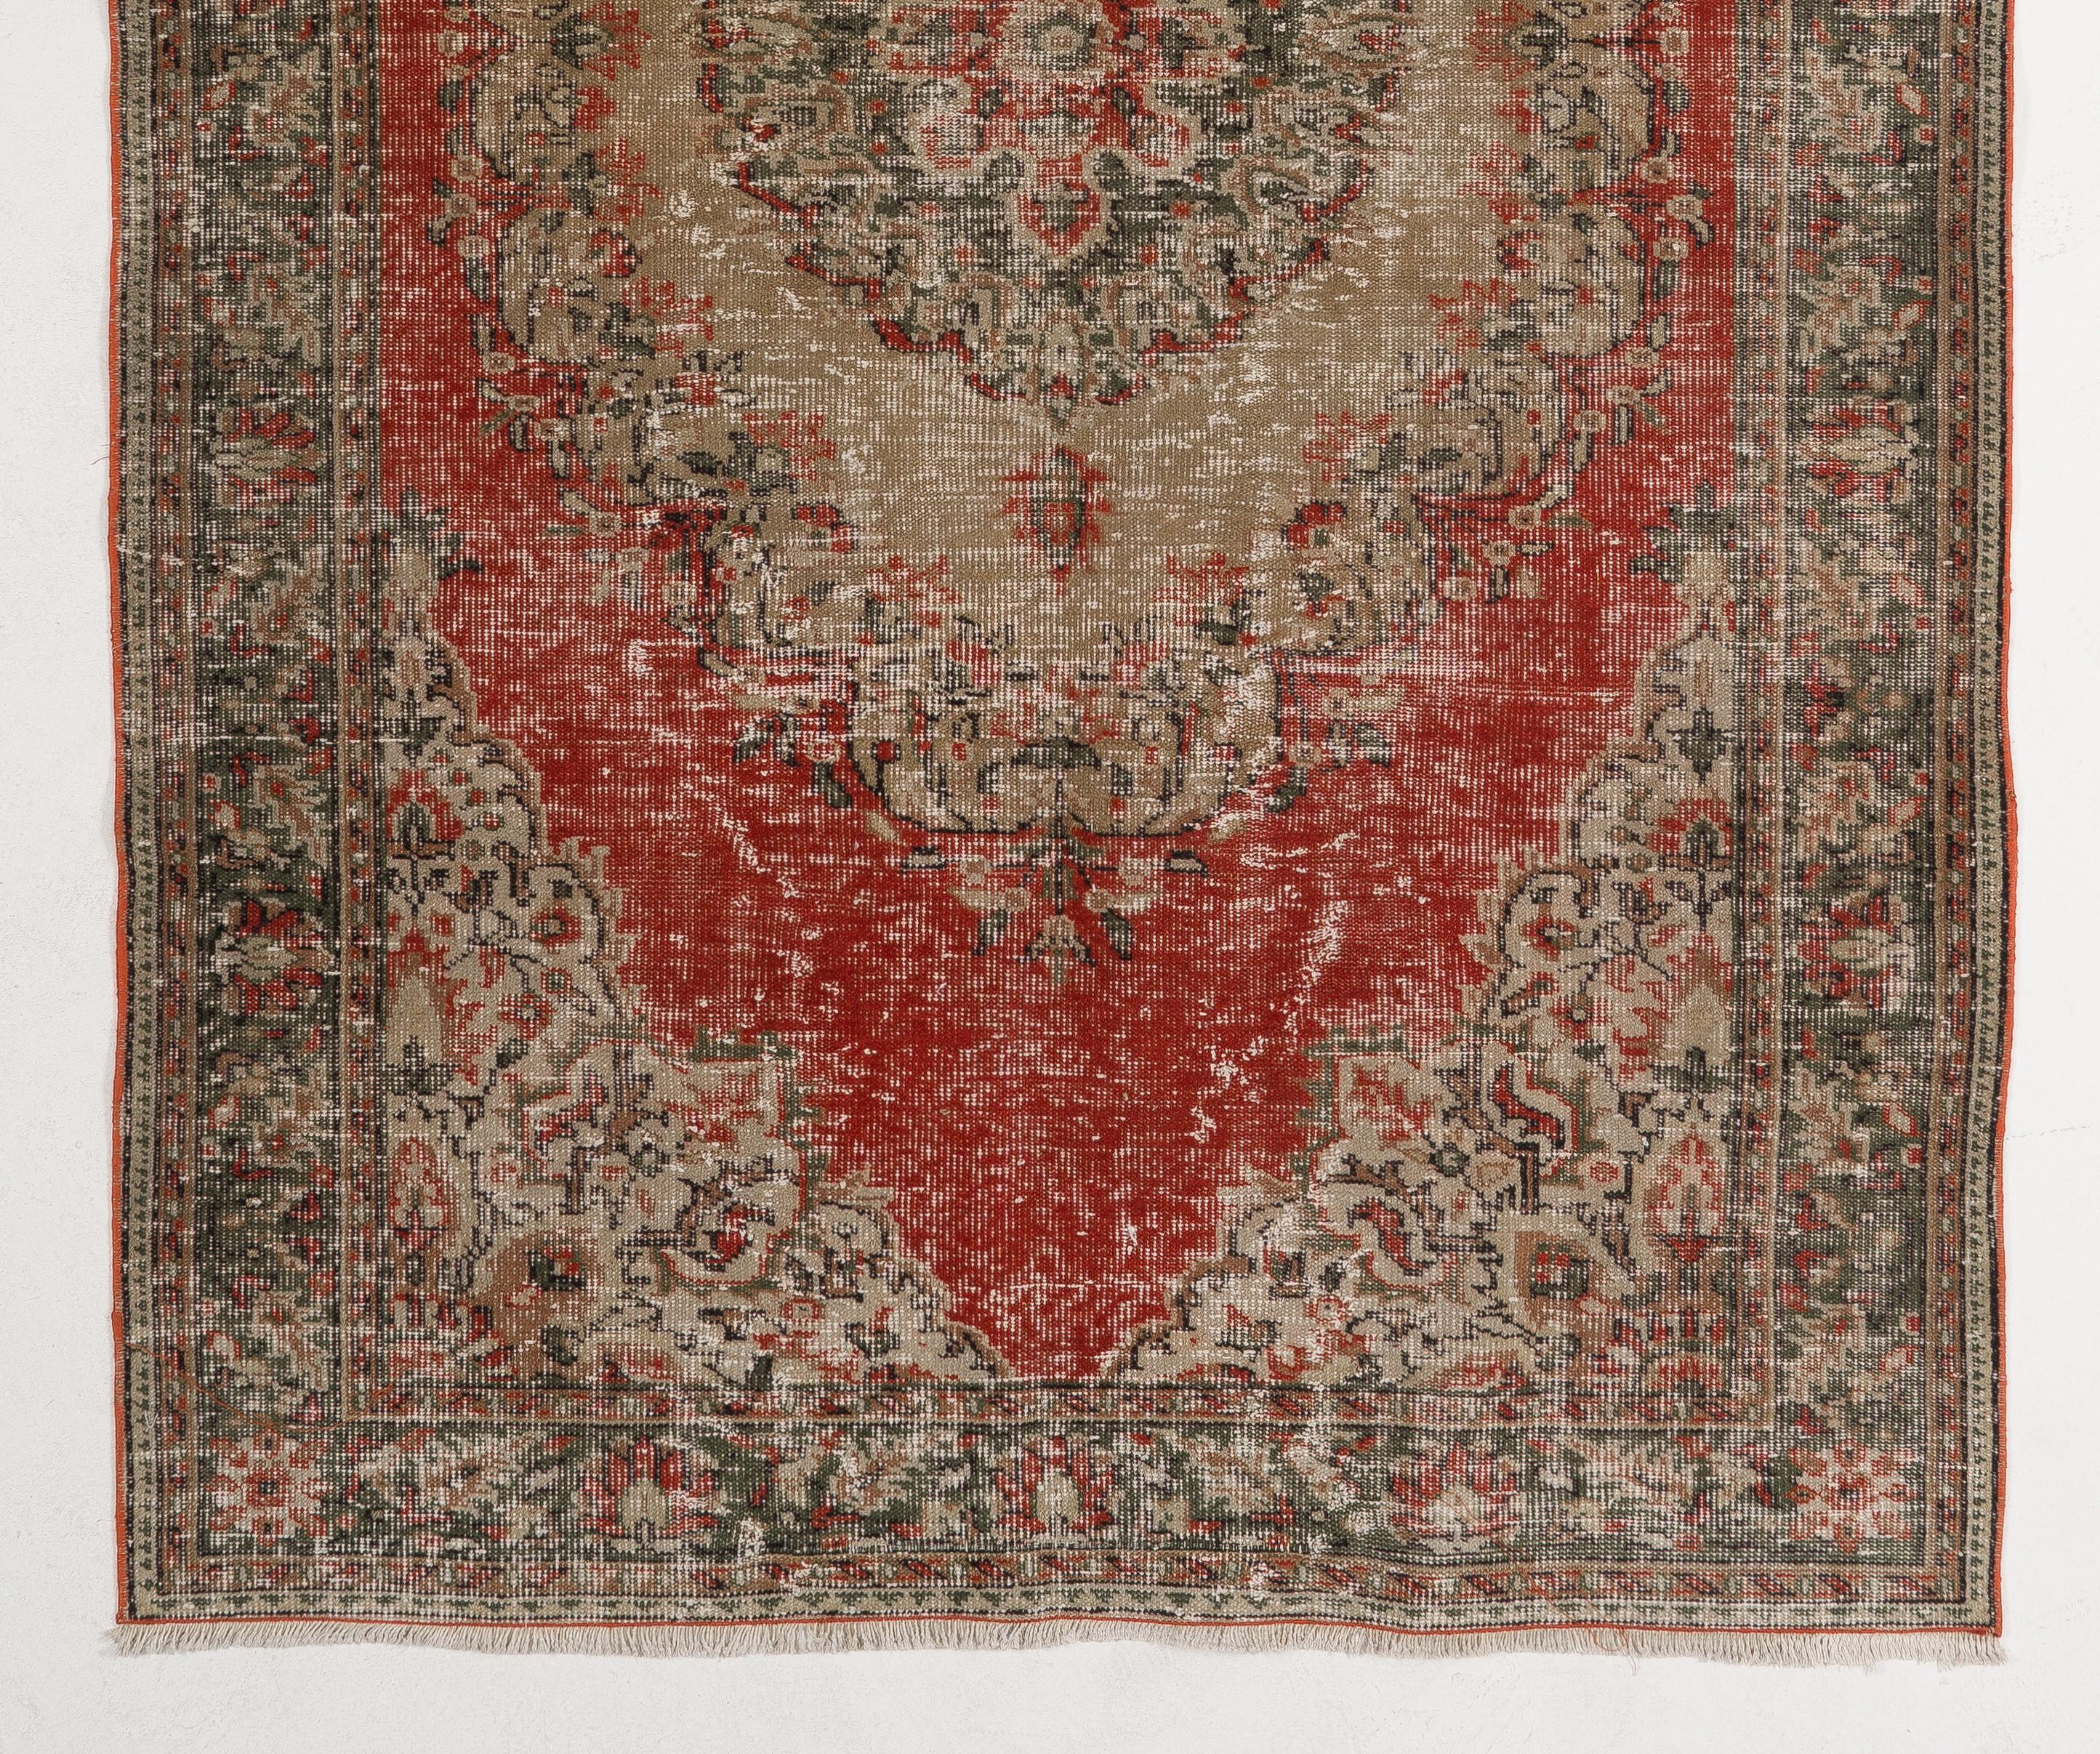 Oushak 6x9.5 ft Vintage Handmade Turkish Wool Rug in Red and Tan with Medallion Design For Sale